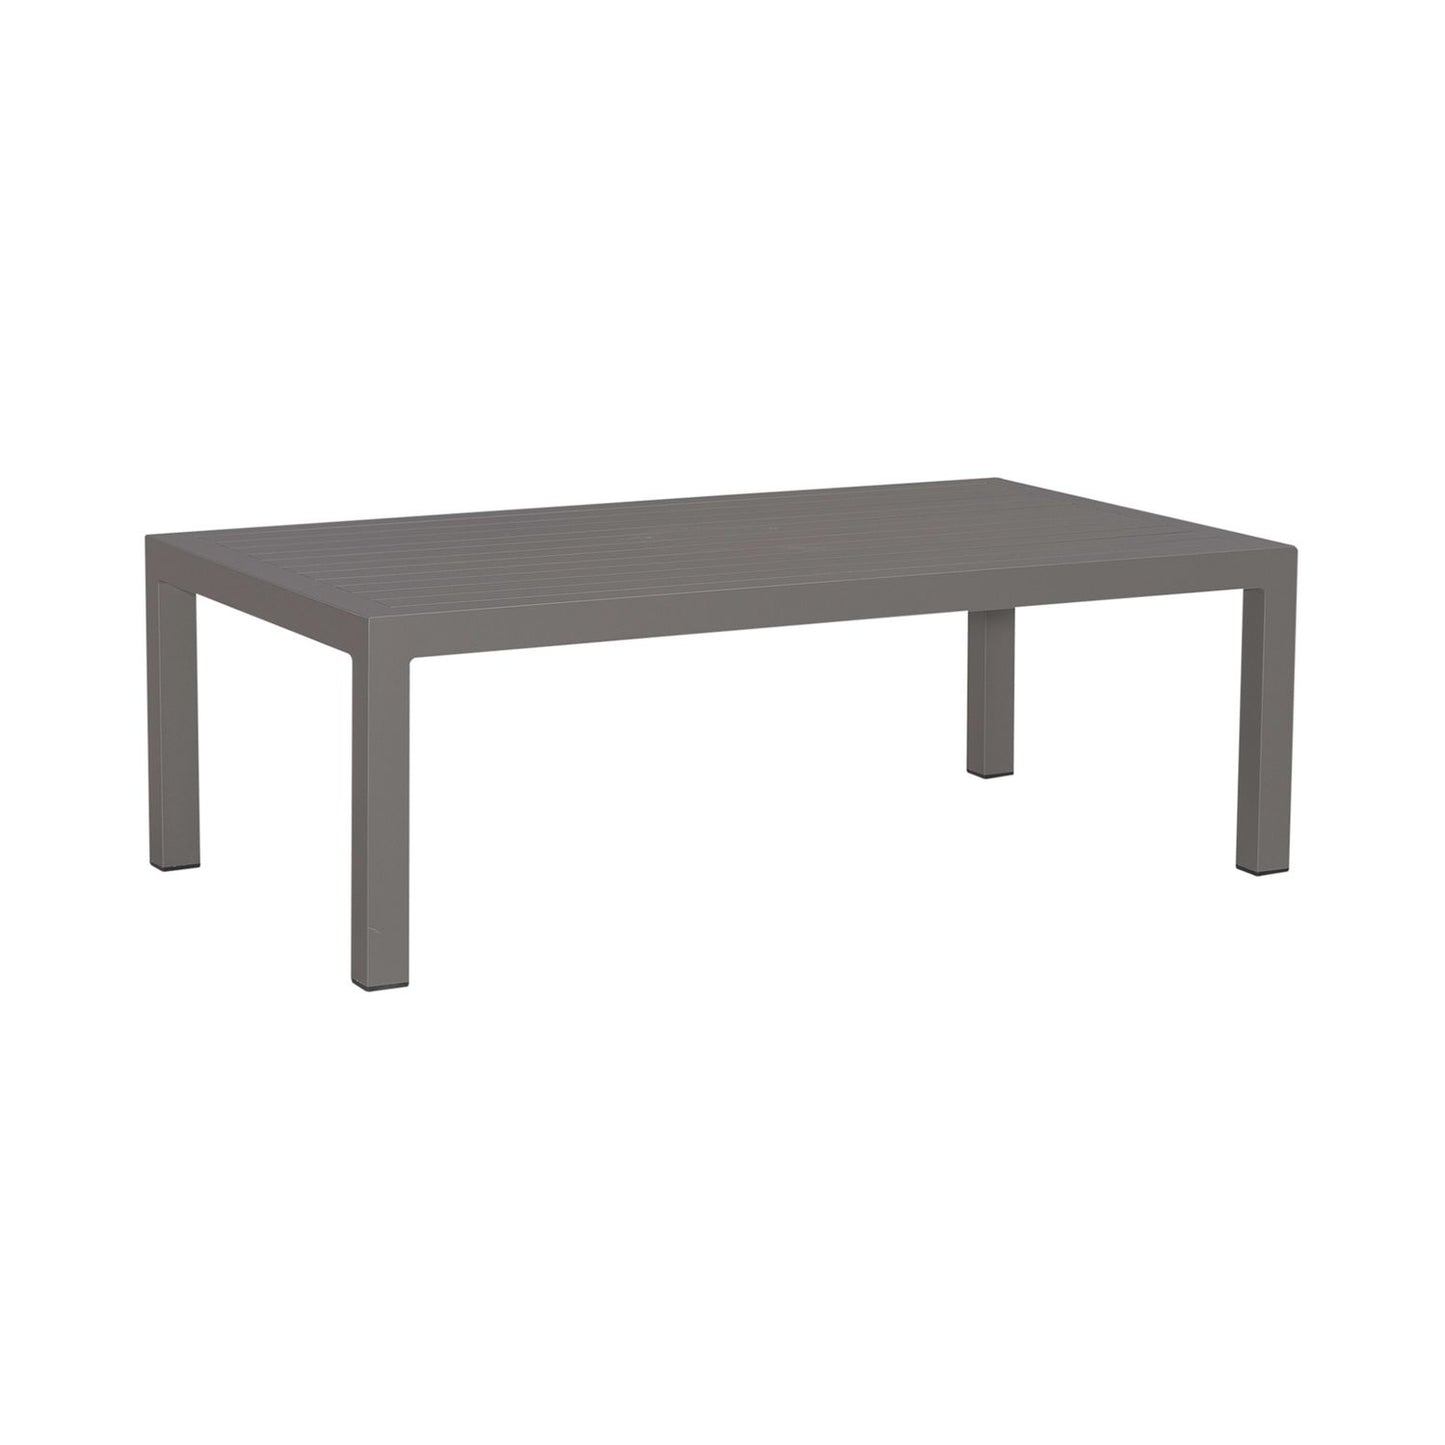 Plantation Key - Outdoor Cocktail Table - Granite